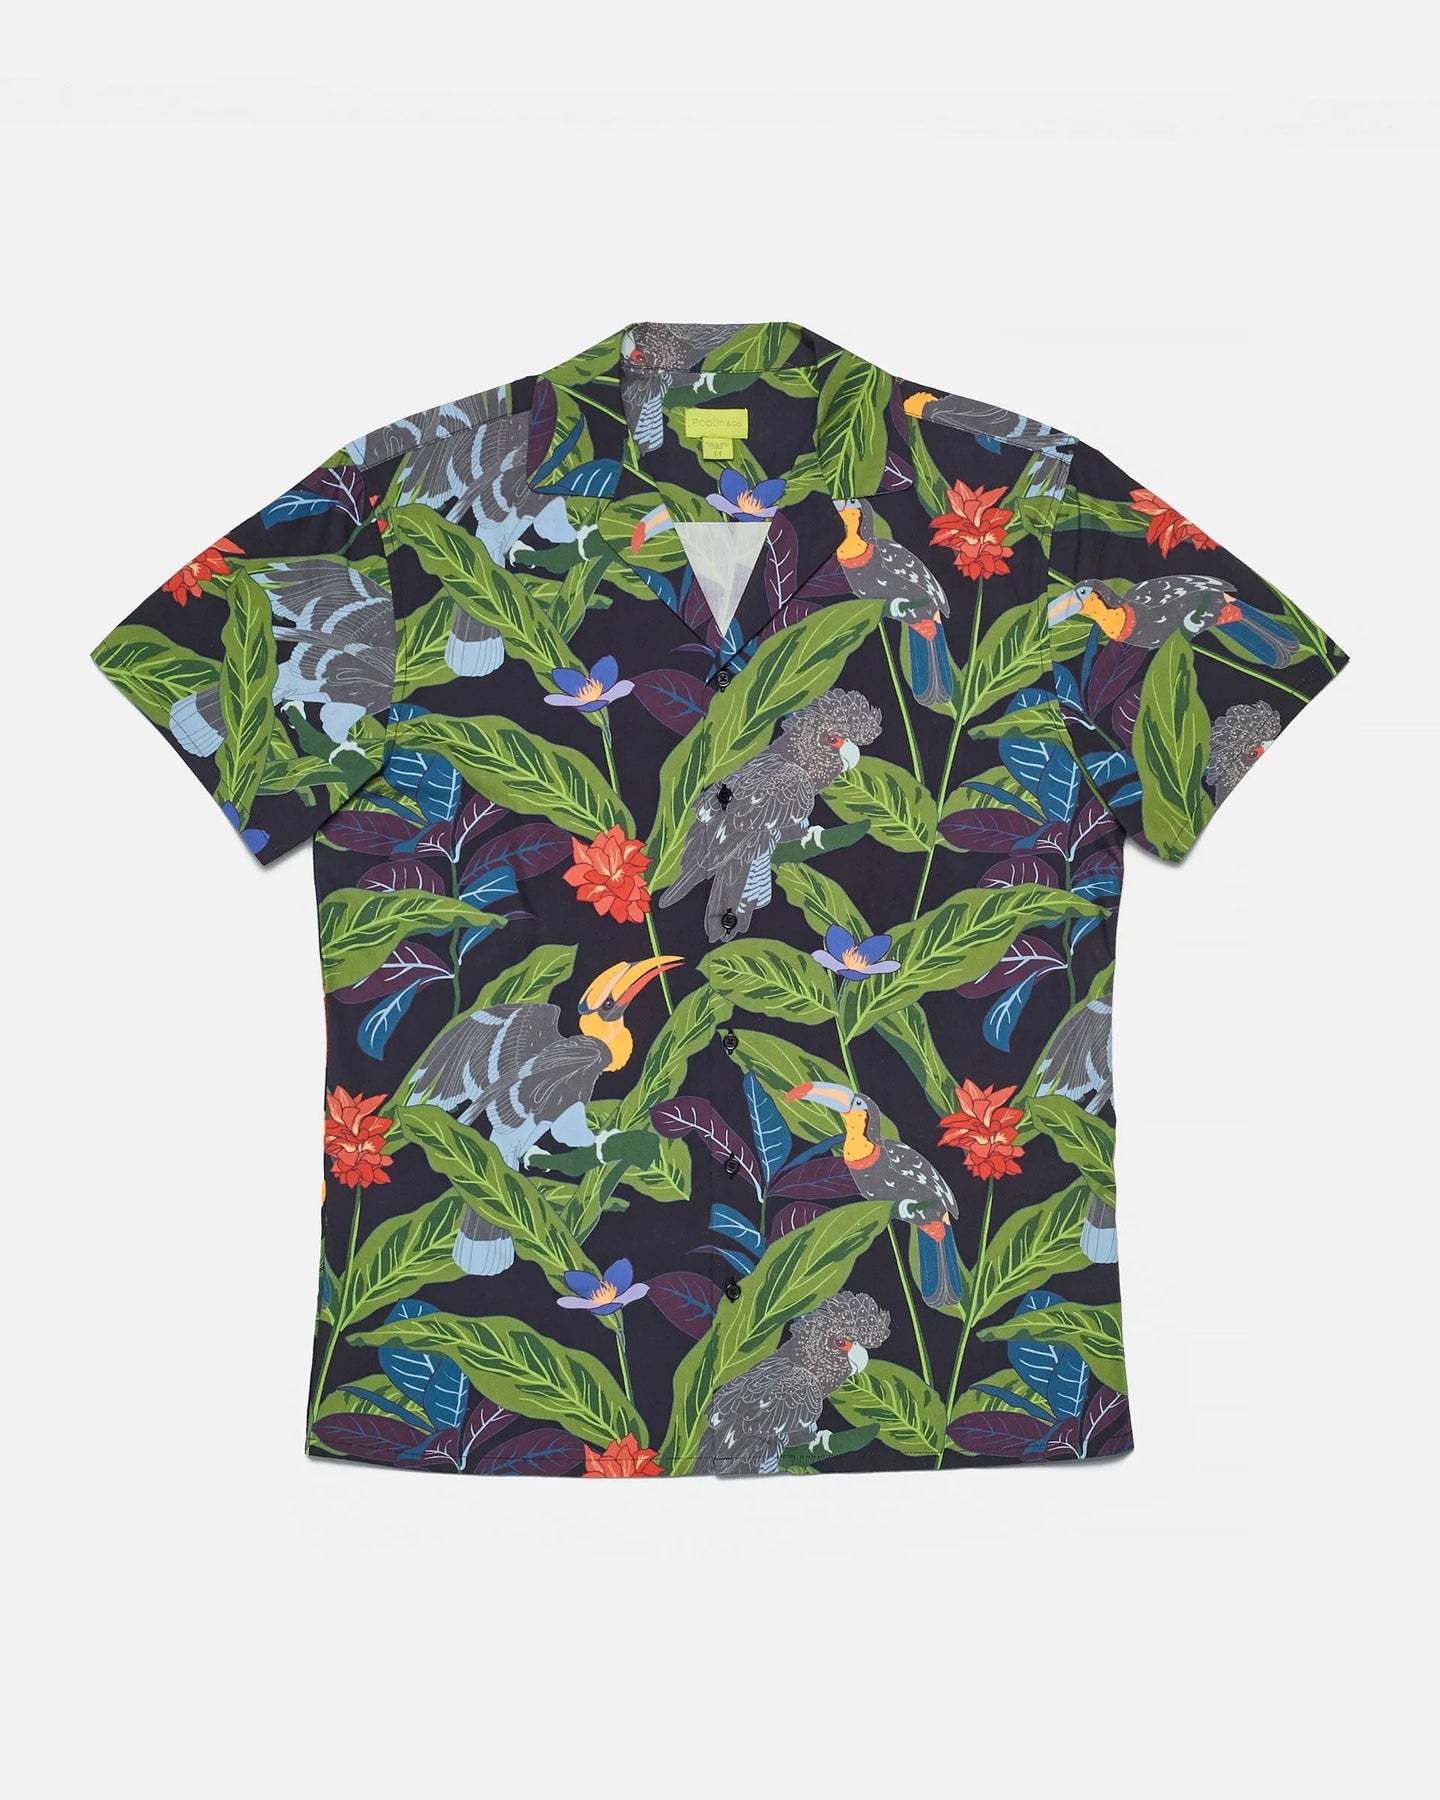 the Poplin & Co Men's Camp Shirt in Tropical Birds laying flat on a white background